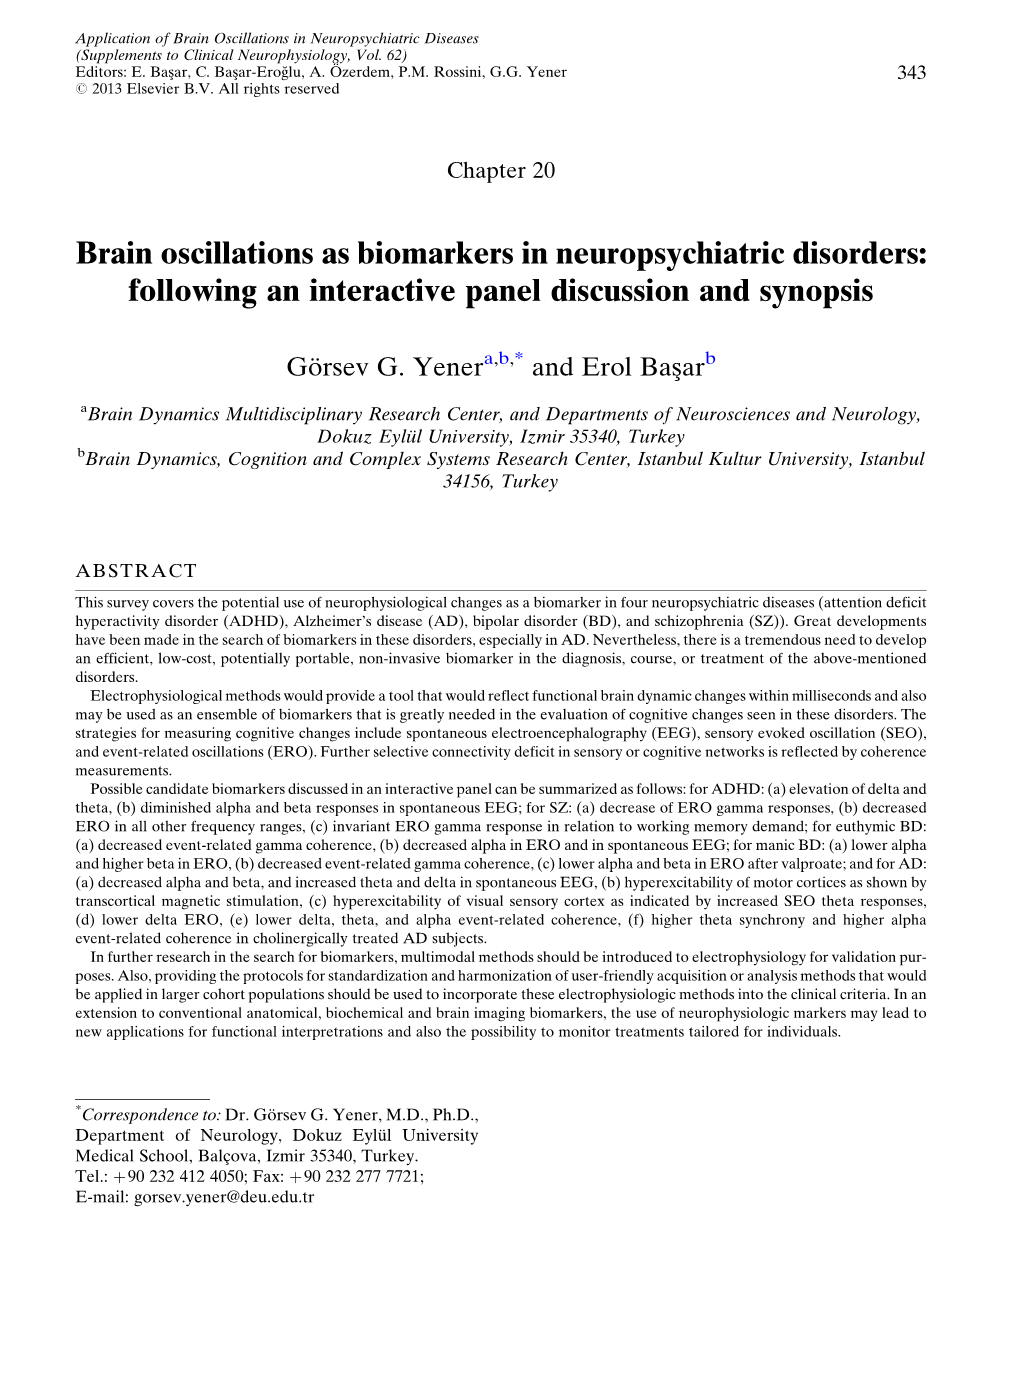 Brain Oscillations As Biomarkers in Neuropsychiatric Disorders: Following an Interactive Panel Discussion and Synopsis